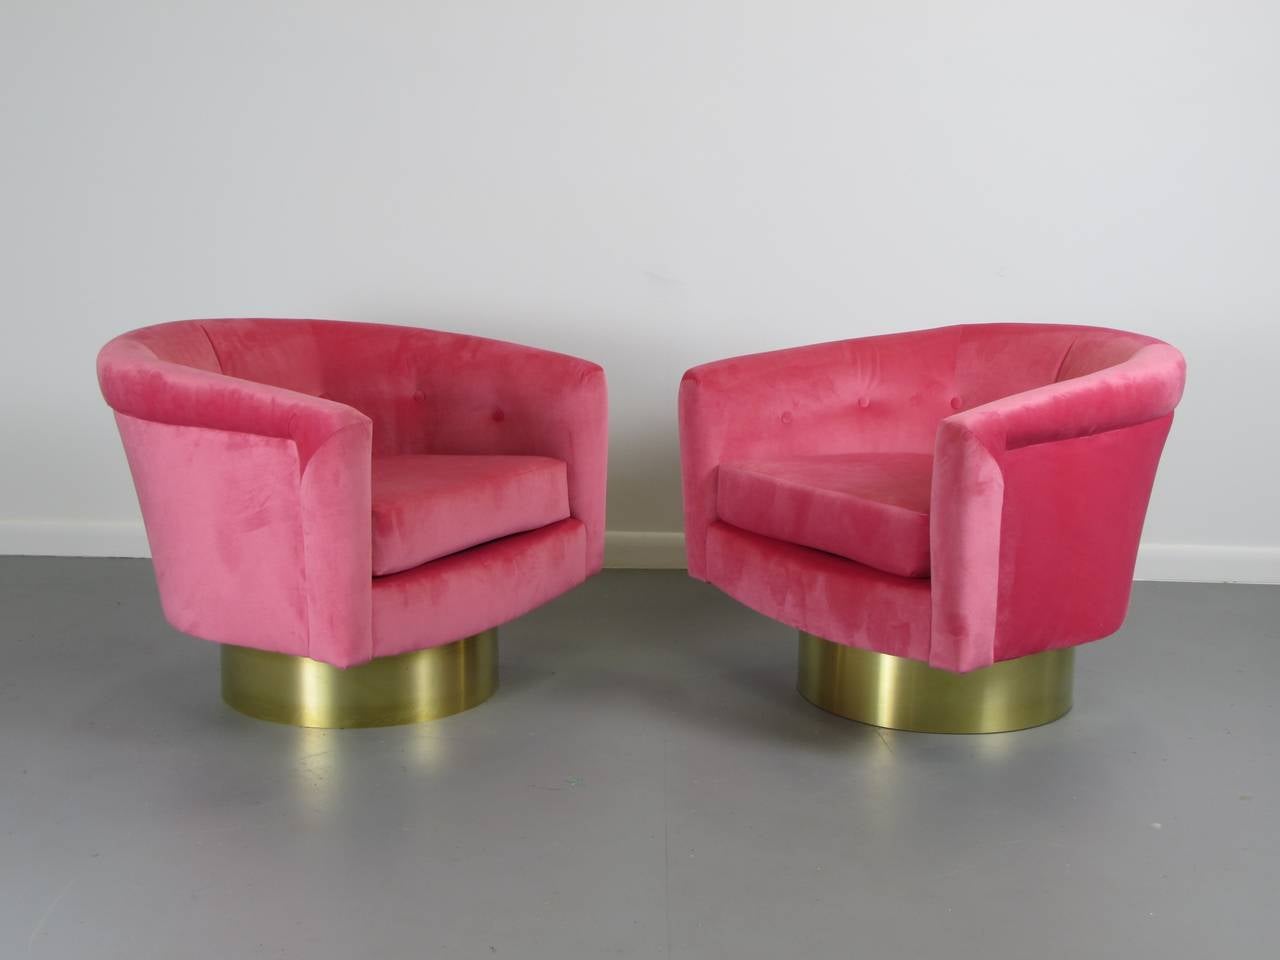 Fabulous pair of Milo Baughman velvet lounge chairs with brass bases, 1970s. Very comfortable. They have been fully restored. Condition is immaculate. 

We offer free regular deliveries to NYC and Philadelphia area. Delivery to DC, MD, CT and MA